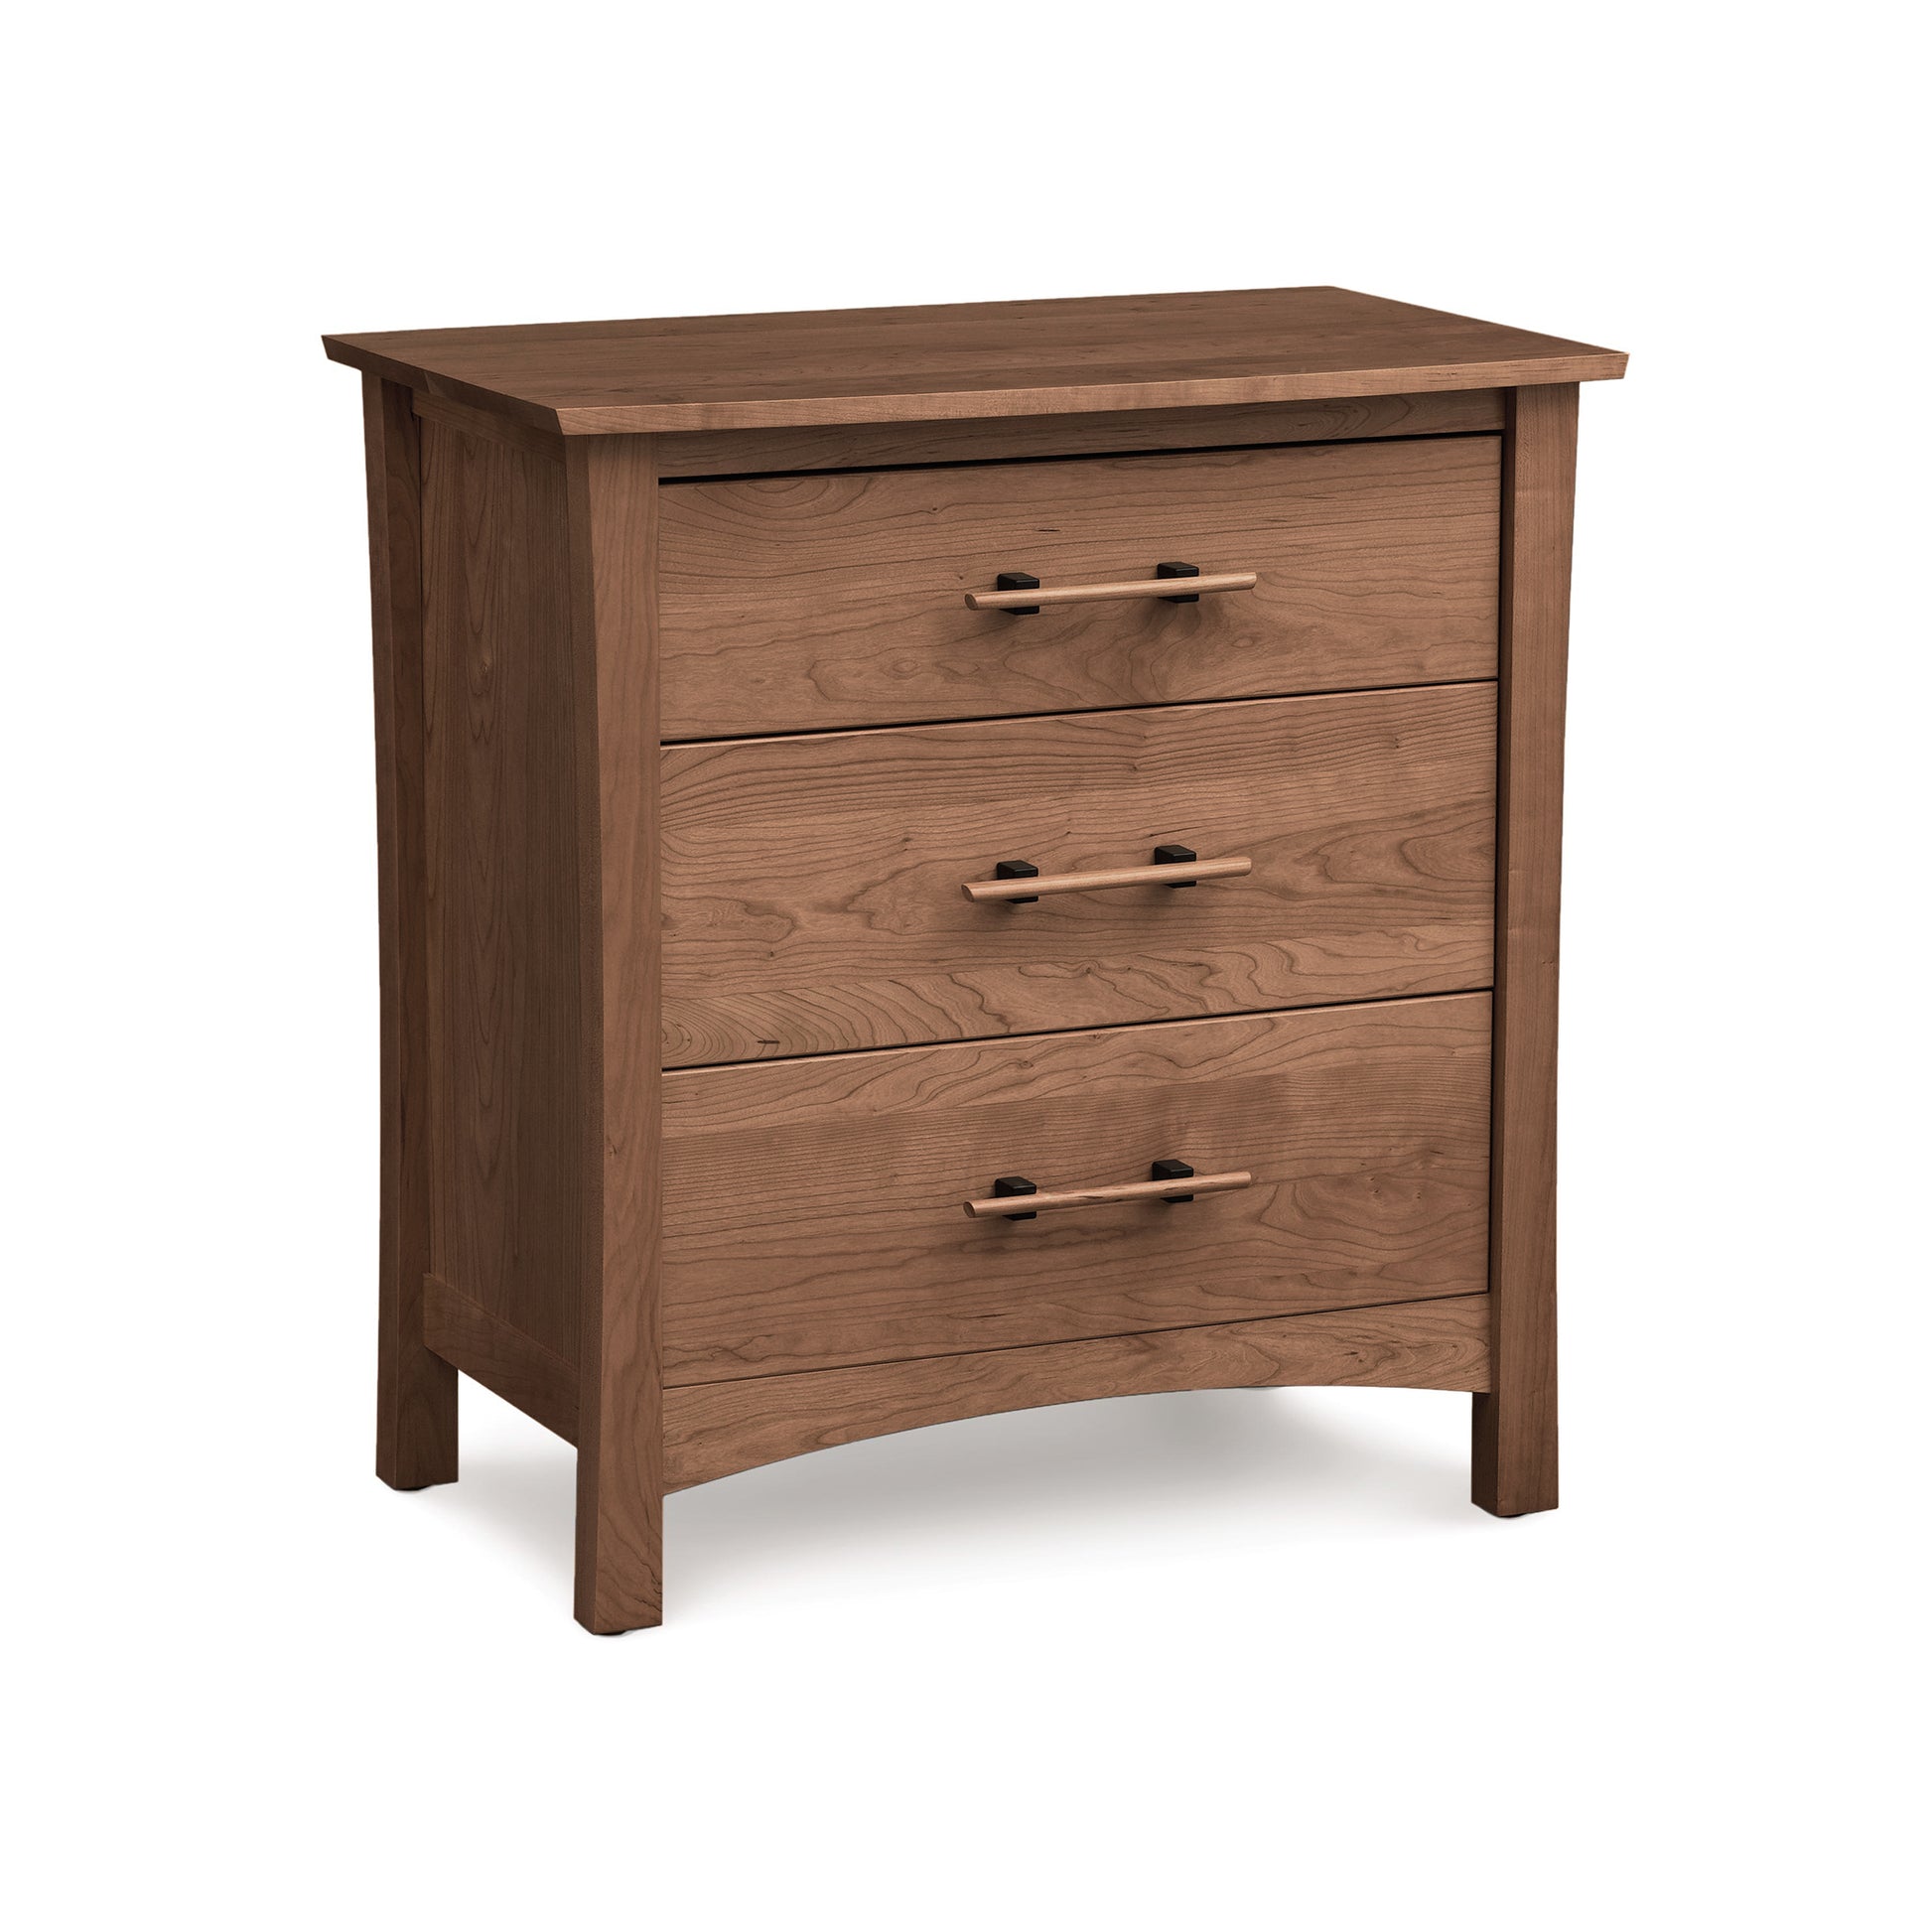 A Copeland Furniture Monterey 3-Drawer Chest on a white background.